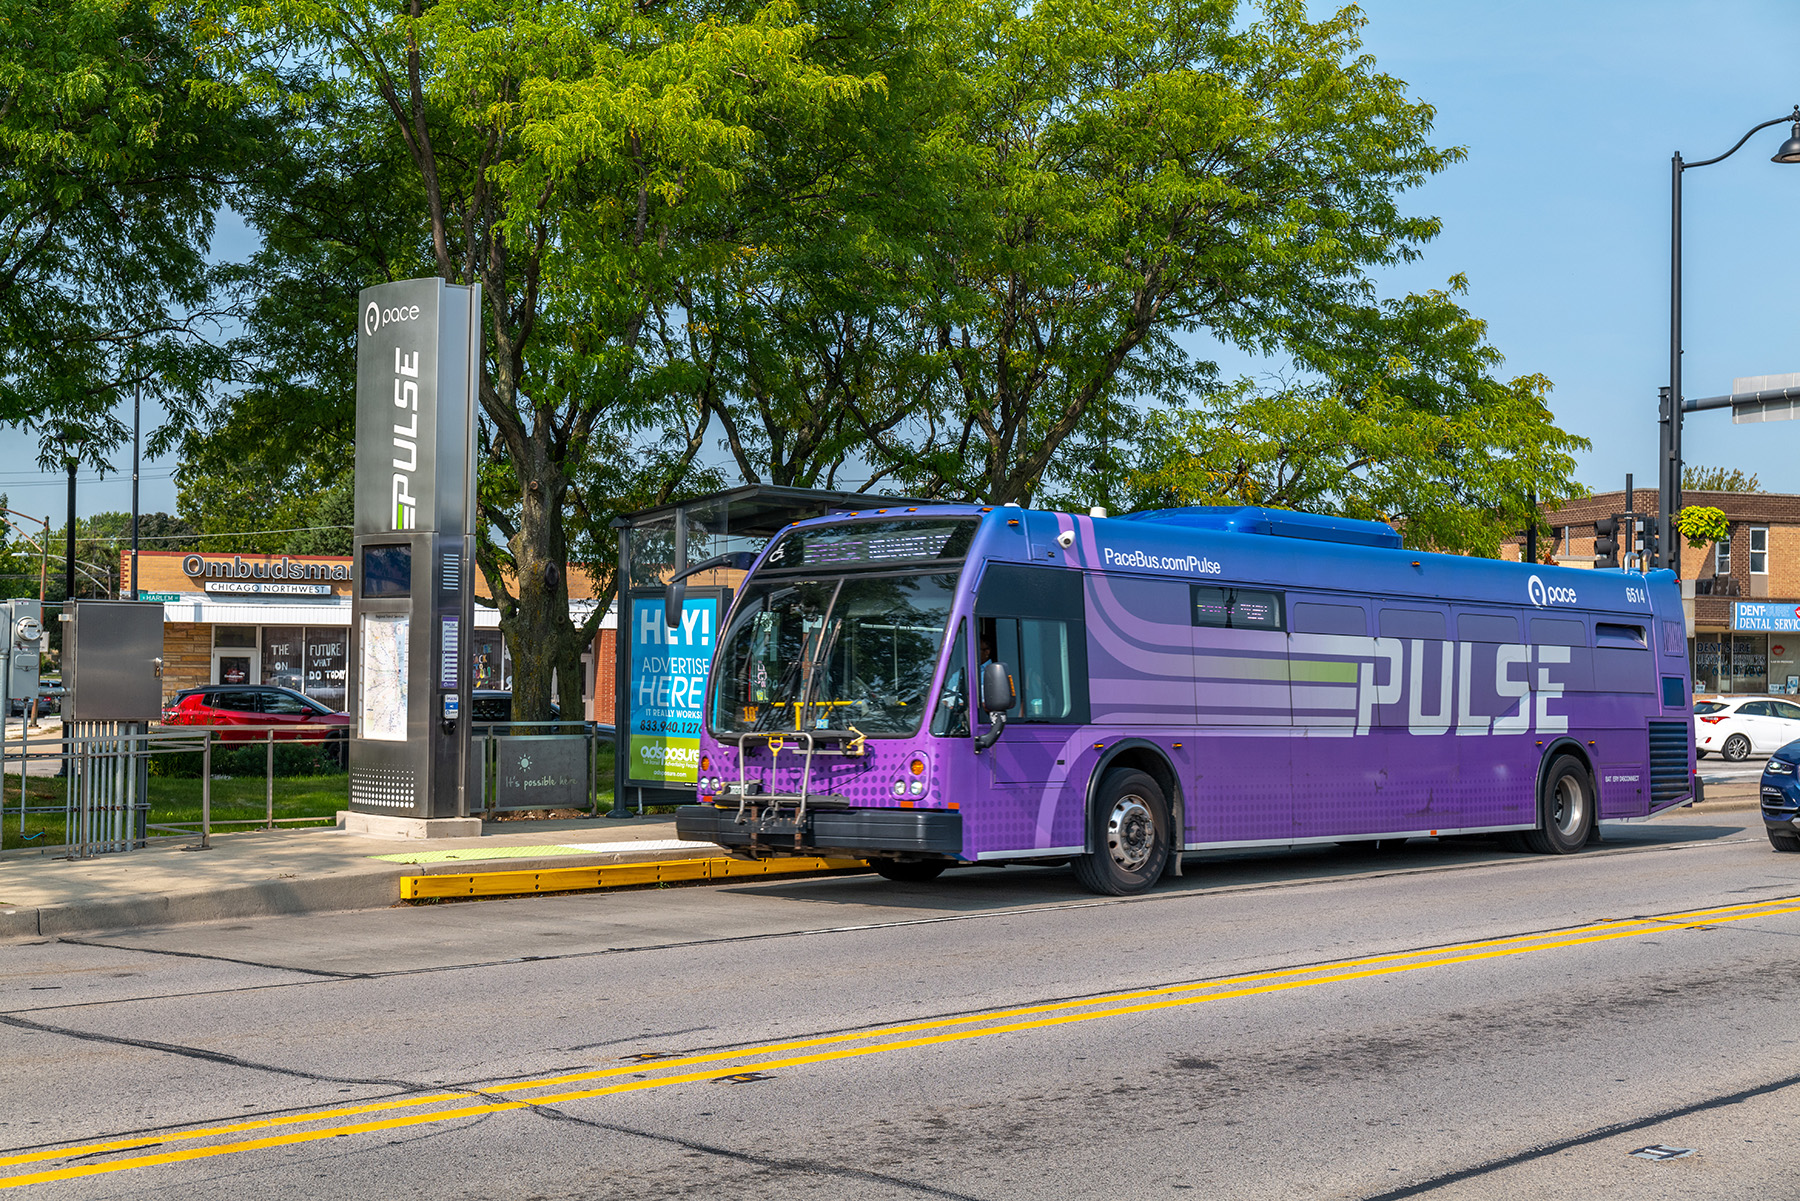 A purple bus travels down the road.